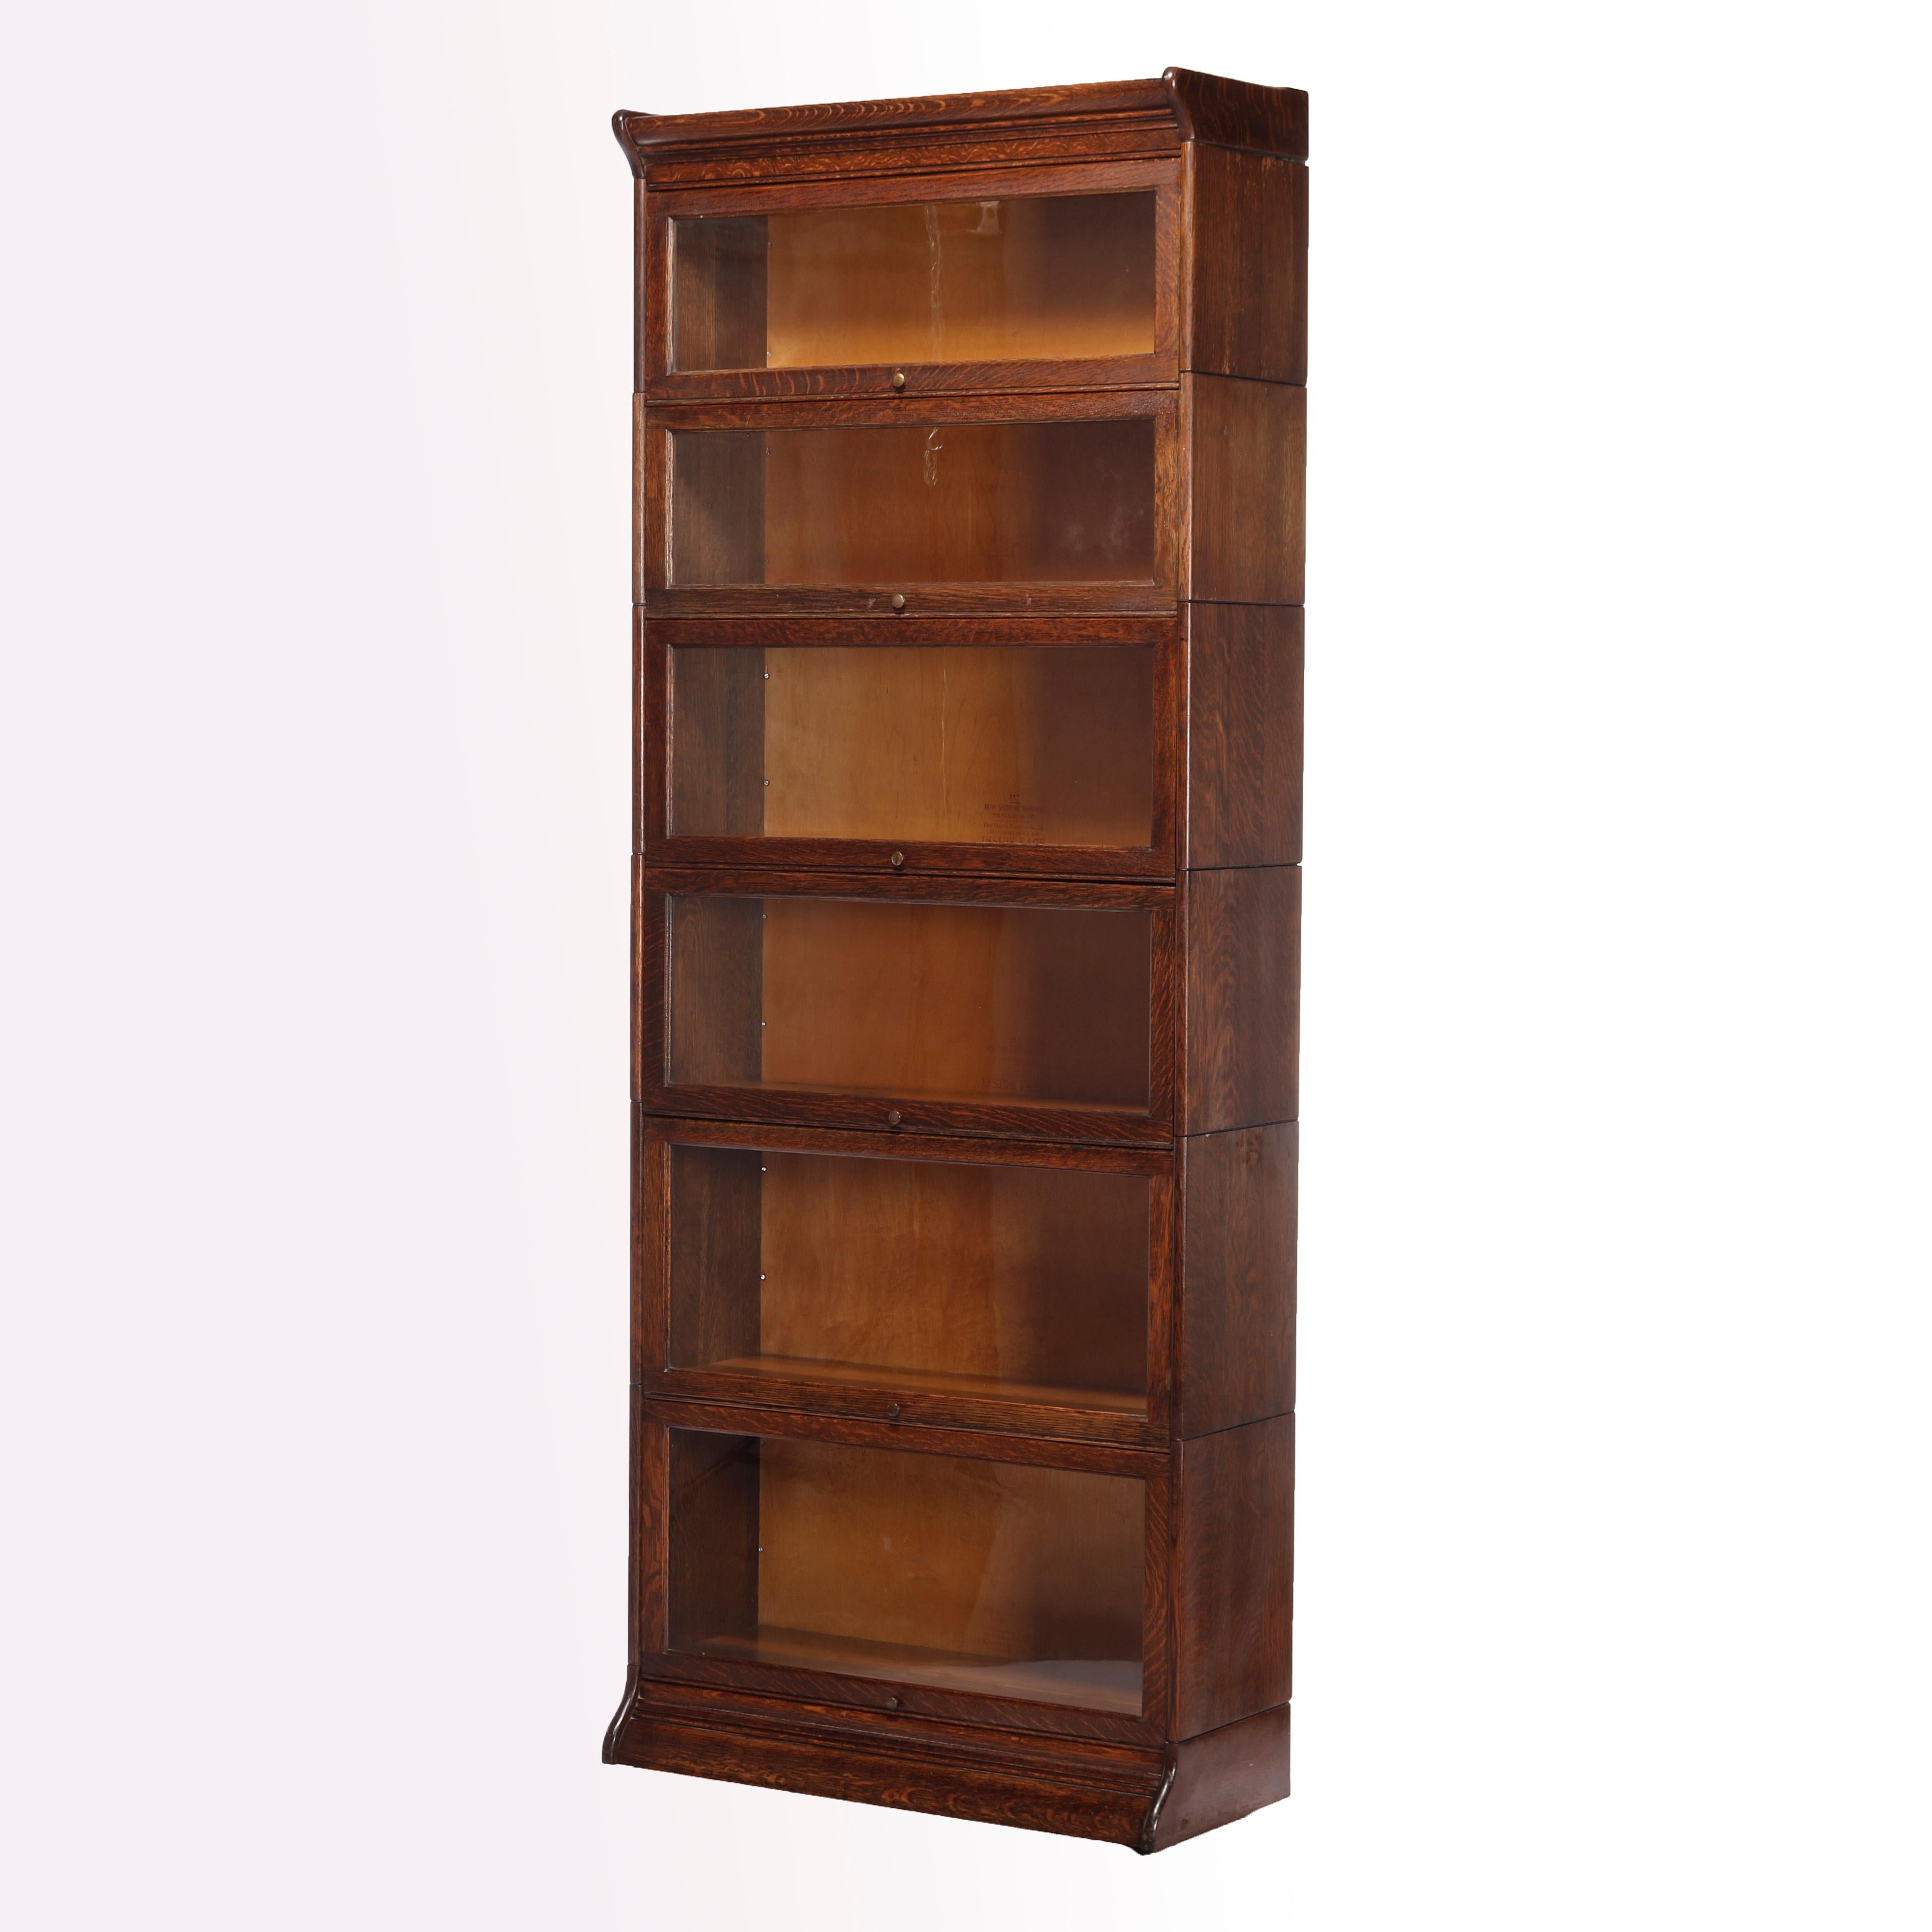 An antique Arts & Crafts sectional barrister bookcase by Gunn offers quarter sawn oak construction with six sections each having pull out glass doors and raised on ogee base, maker labels as photographed, c1910

Measures- 88'' H x 34.25'' W x 14.5''